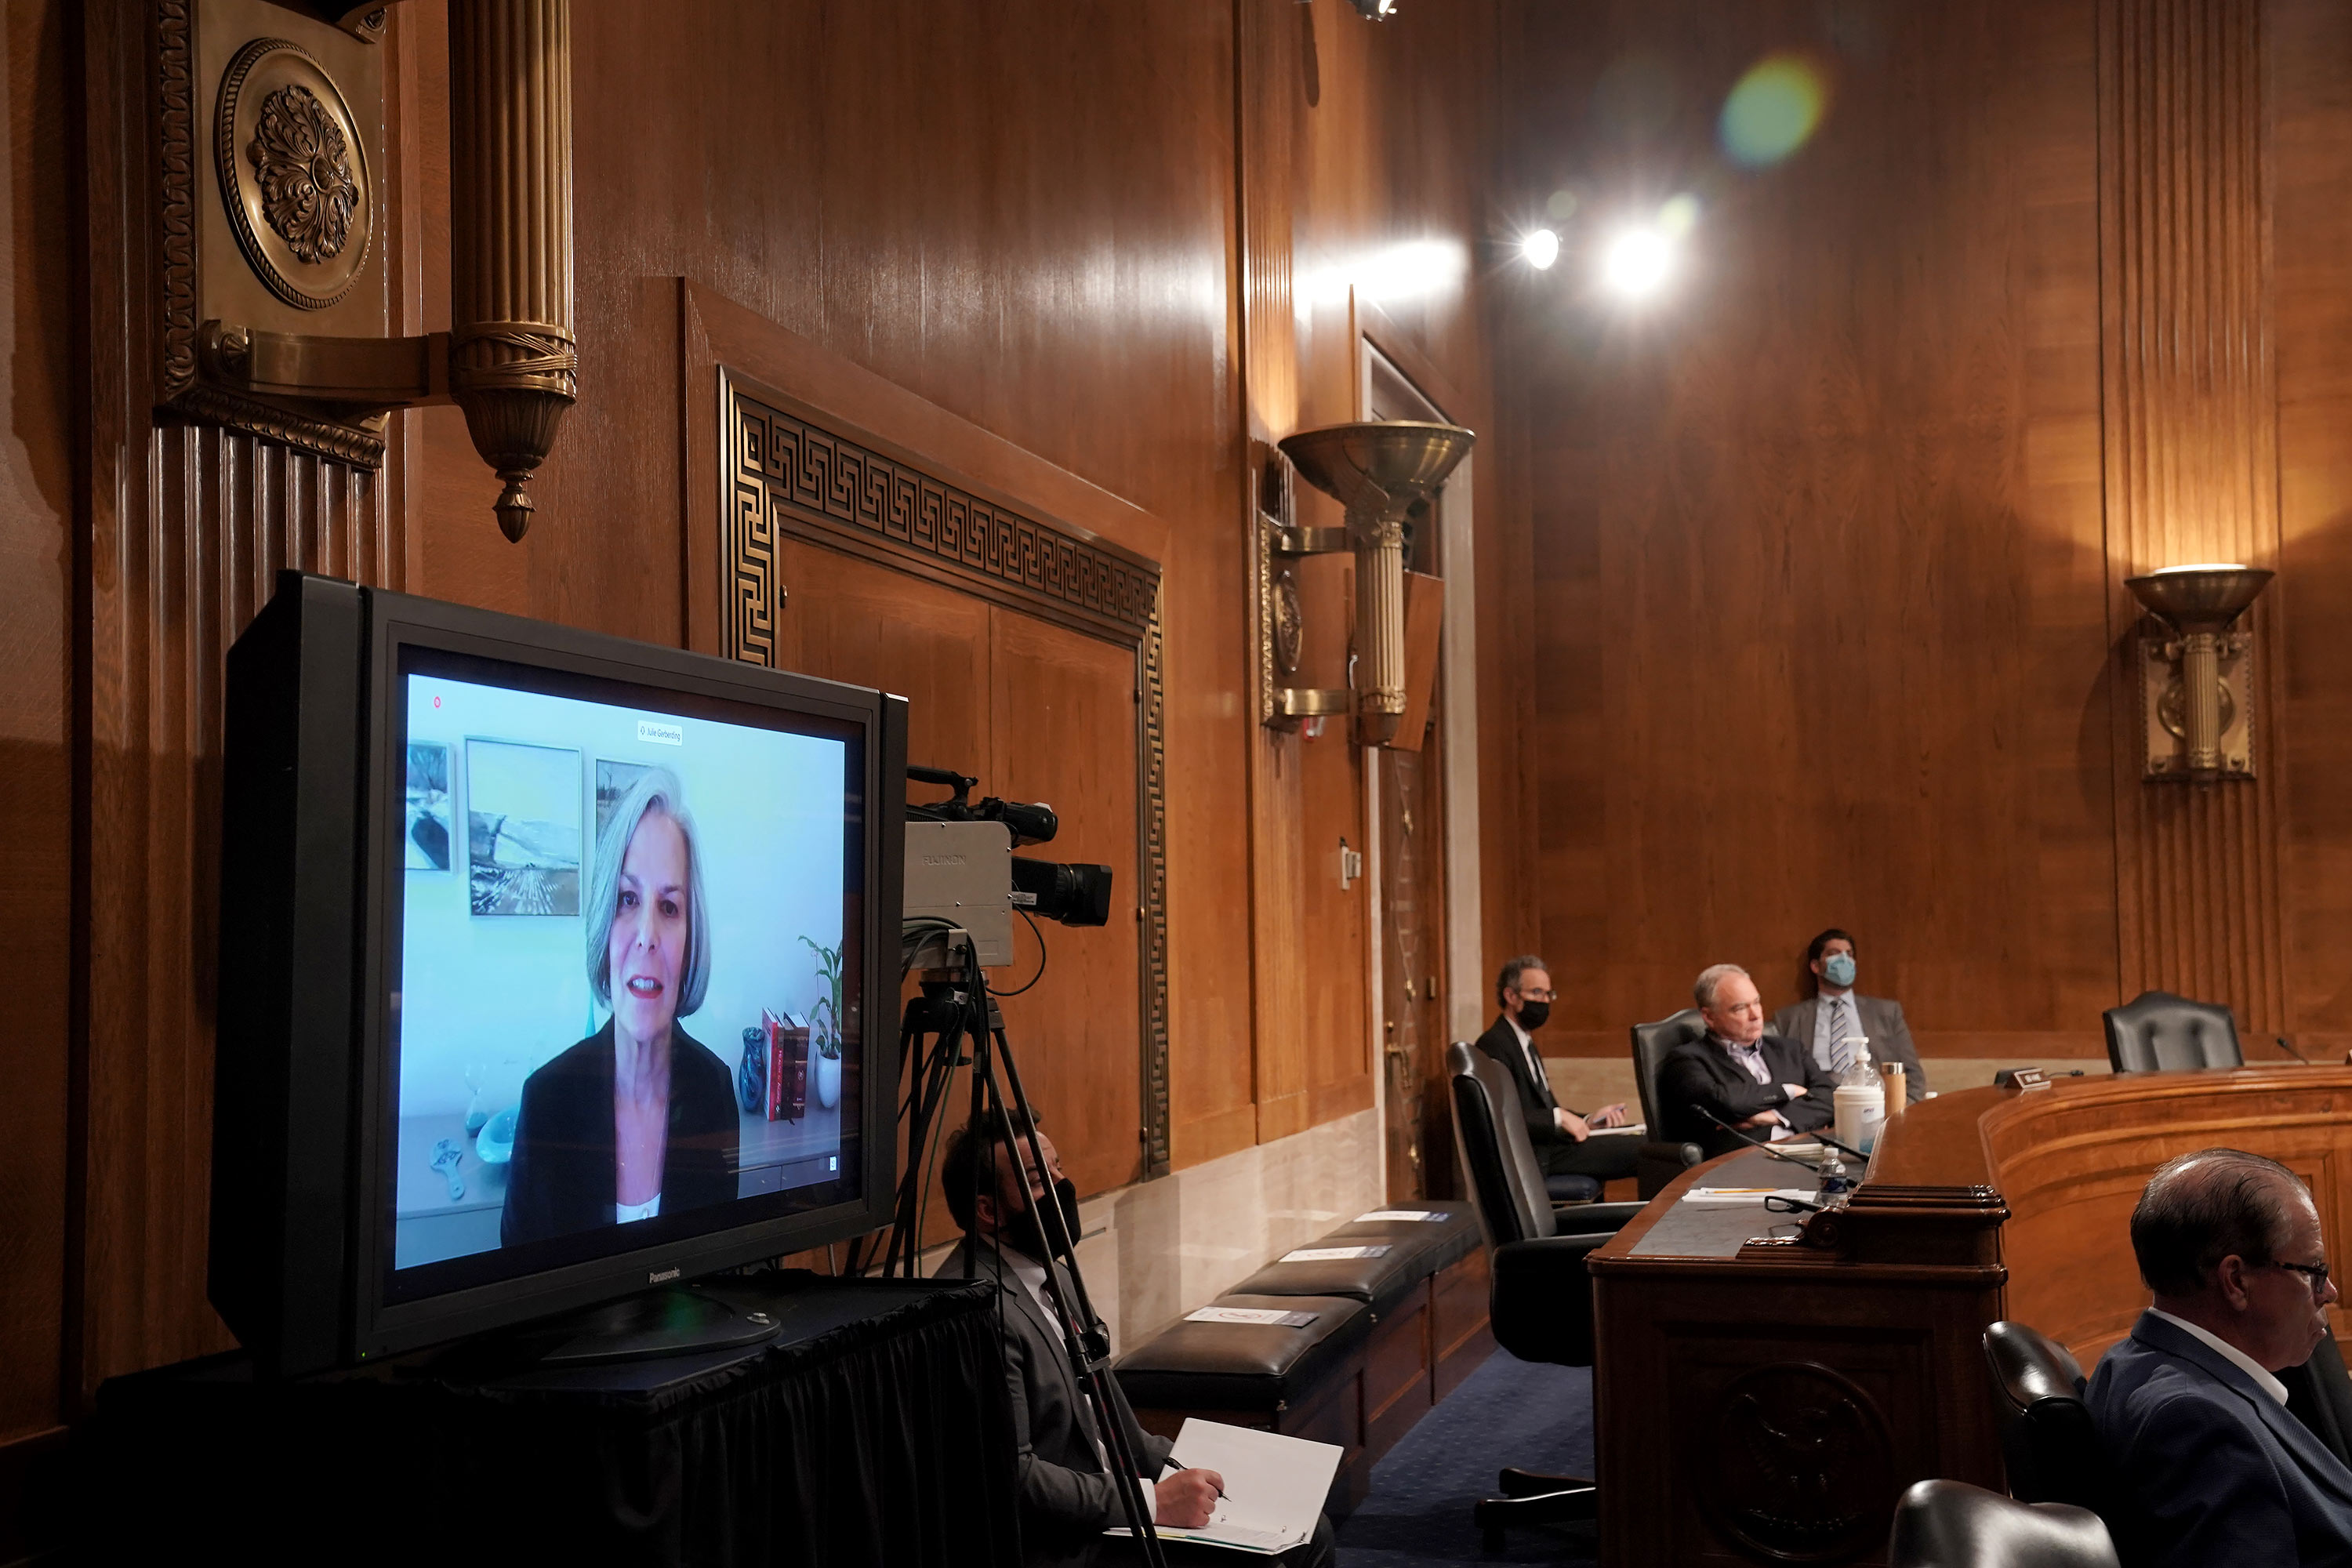 Dr. Julie Gerberding, former director of the US Centers for the Centers for Disease Control and Prevention, is seen on a screen as she gives an opening statement during a Senate Health, Education, Labor and Pensions Committee hearing on Capitol Hill on June 23 in Washington, DC. 